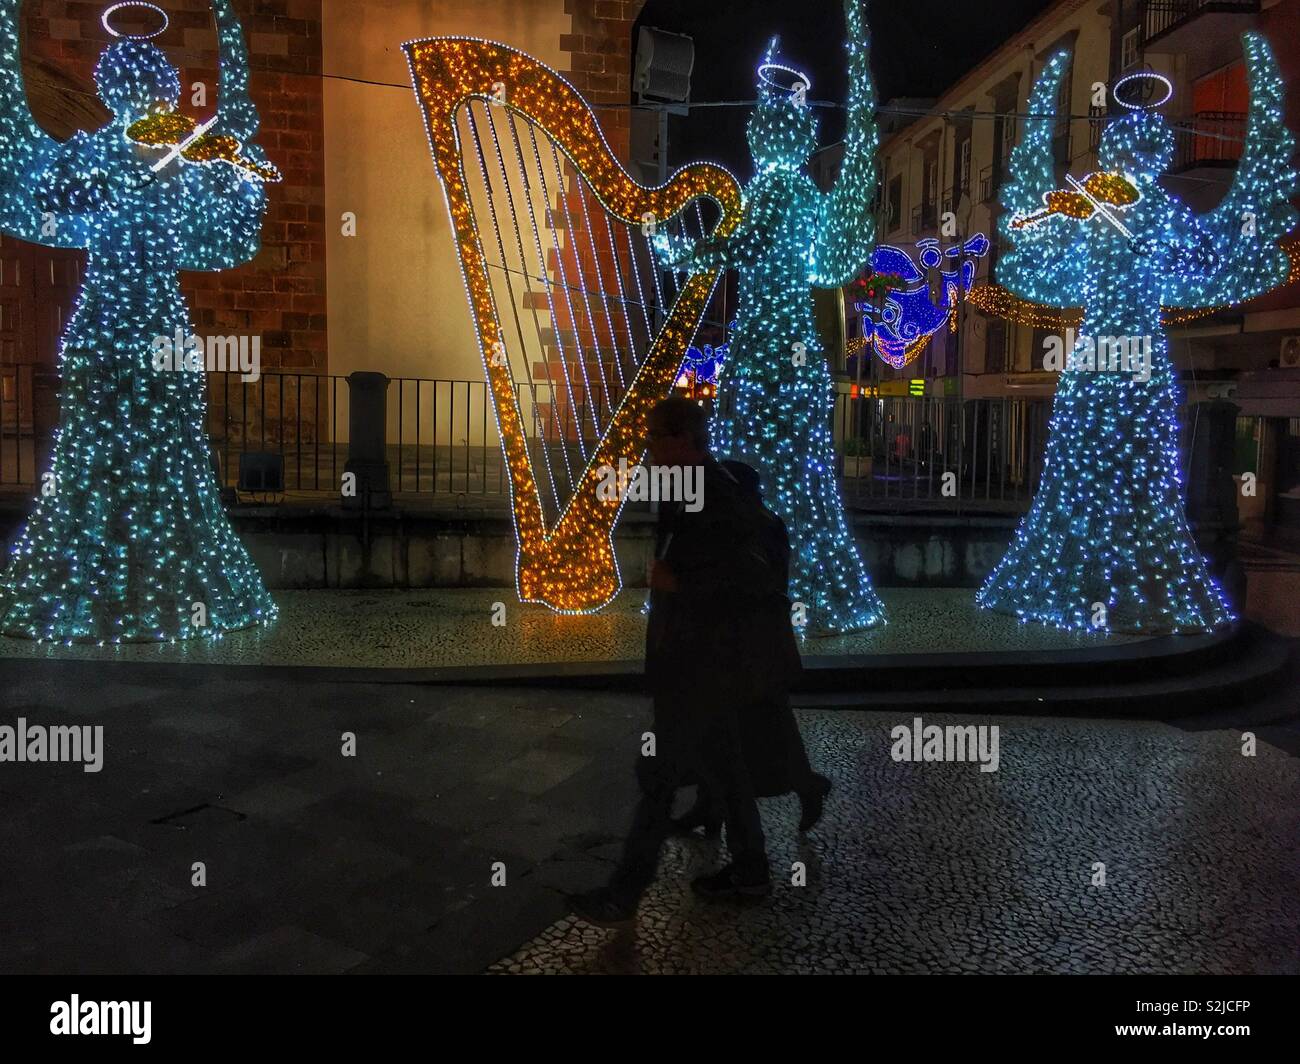 Christmas lighting on three angels playing musical instruments. Stock Photo